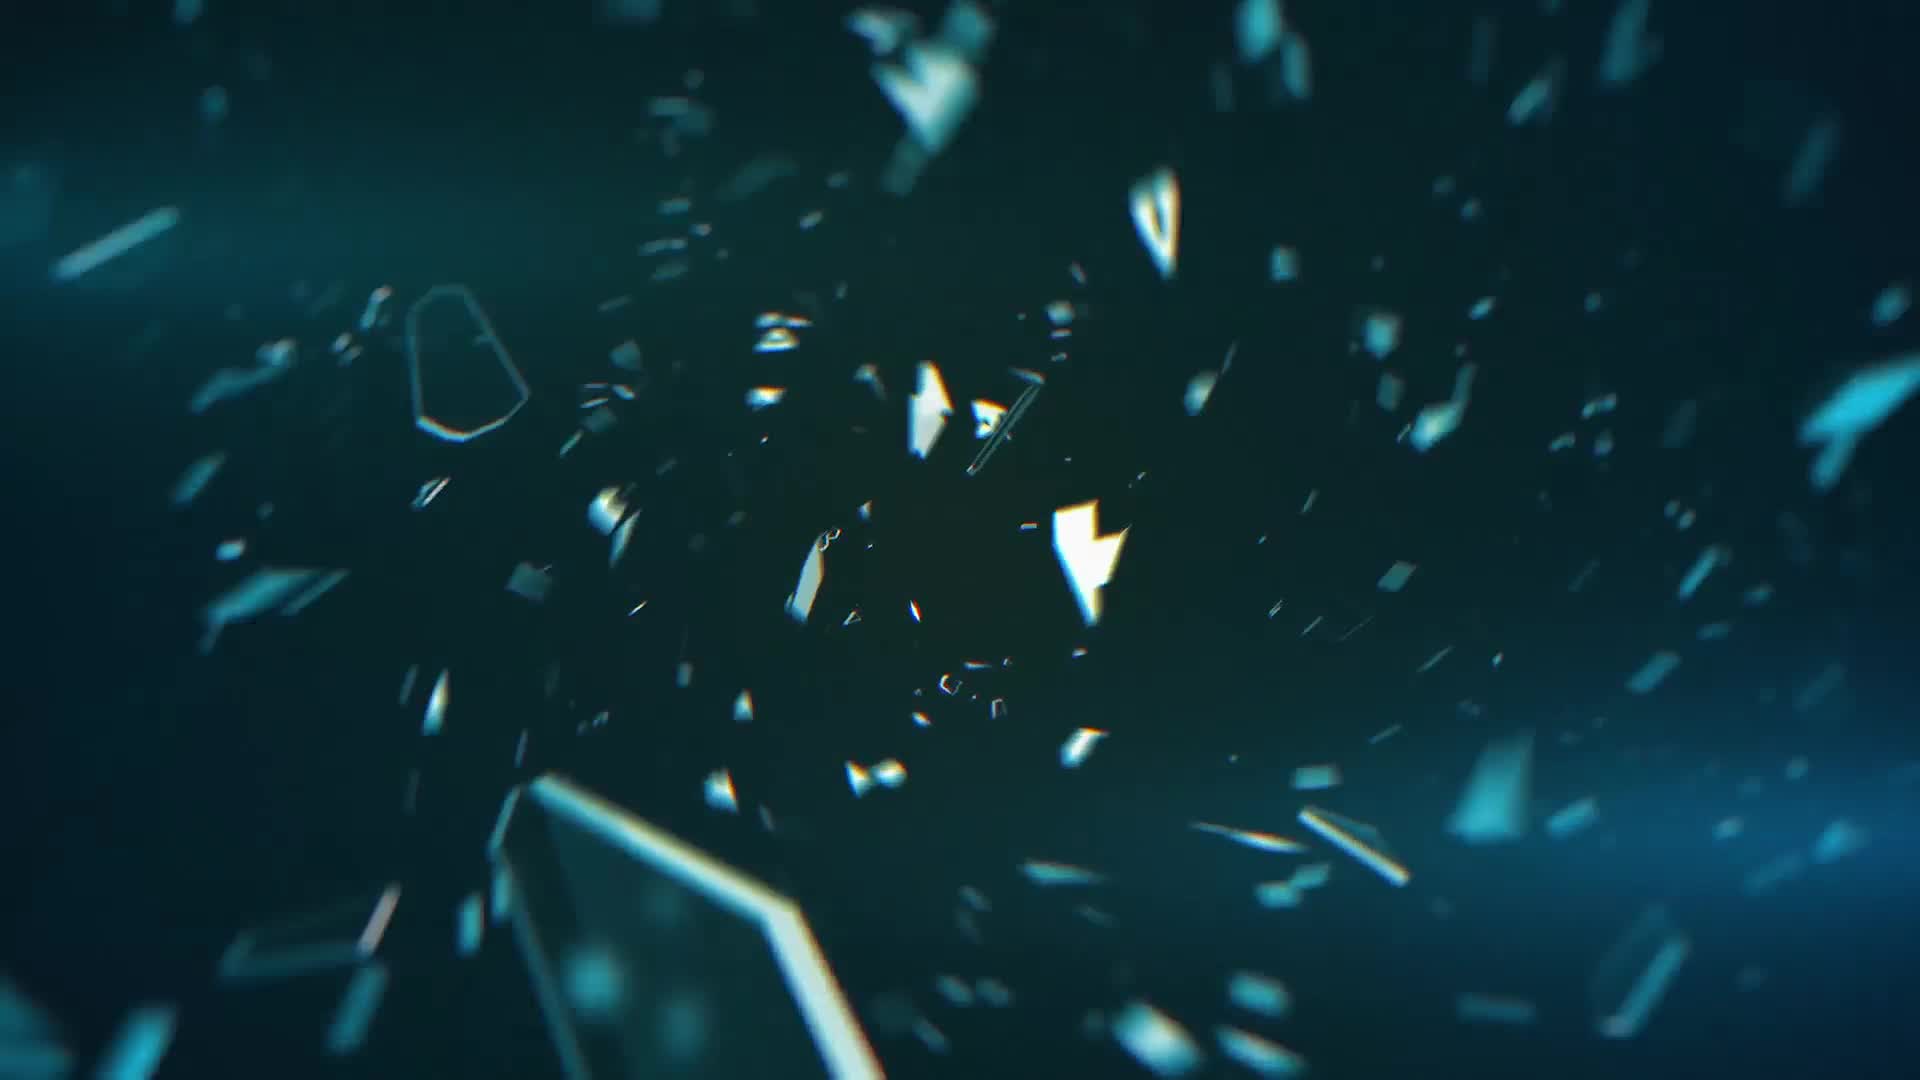 Shatter Glass Trailer Videohive 22992851 Download Direct After Effects